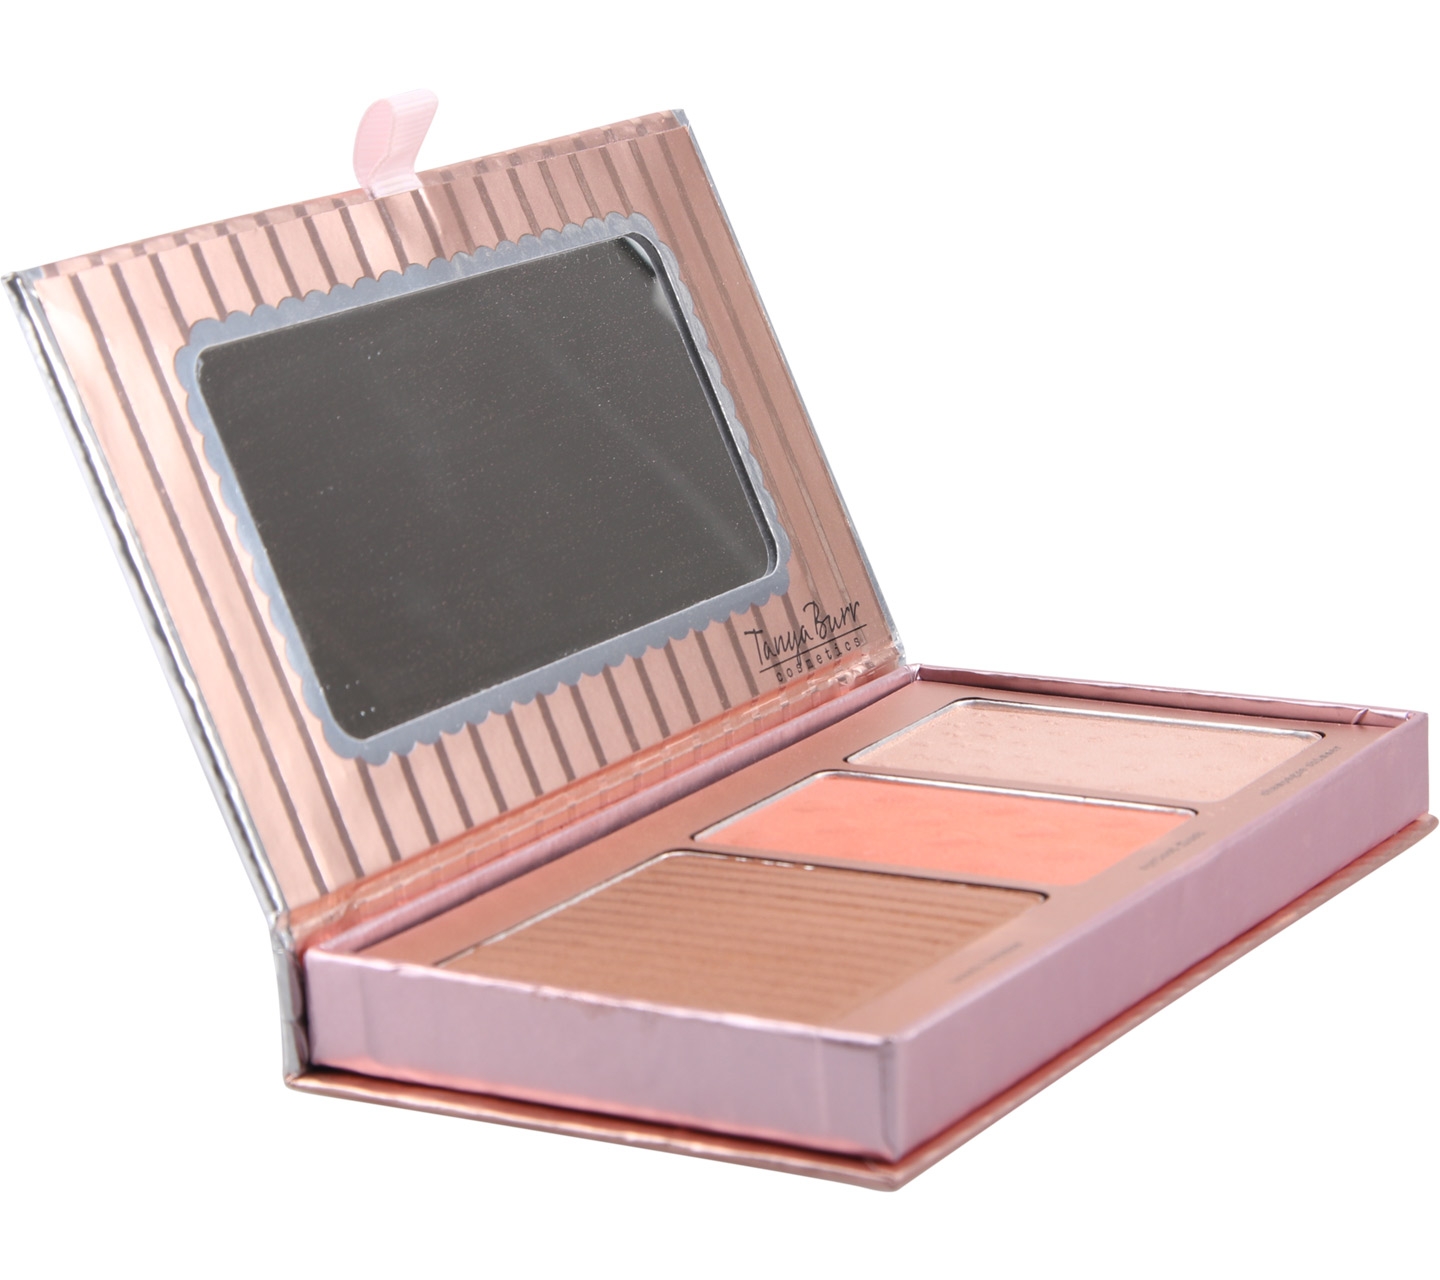 Tanya Burr Cosmetic Peachy Glow Cheek Palette Sets and Palette